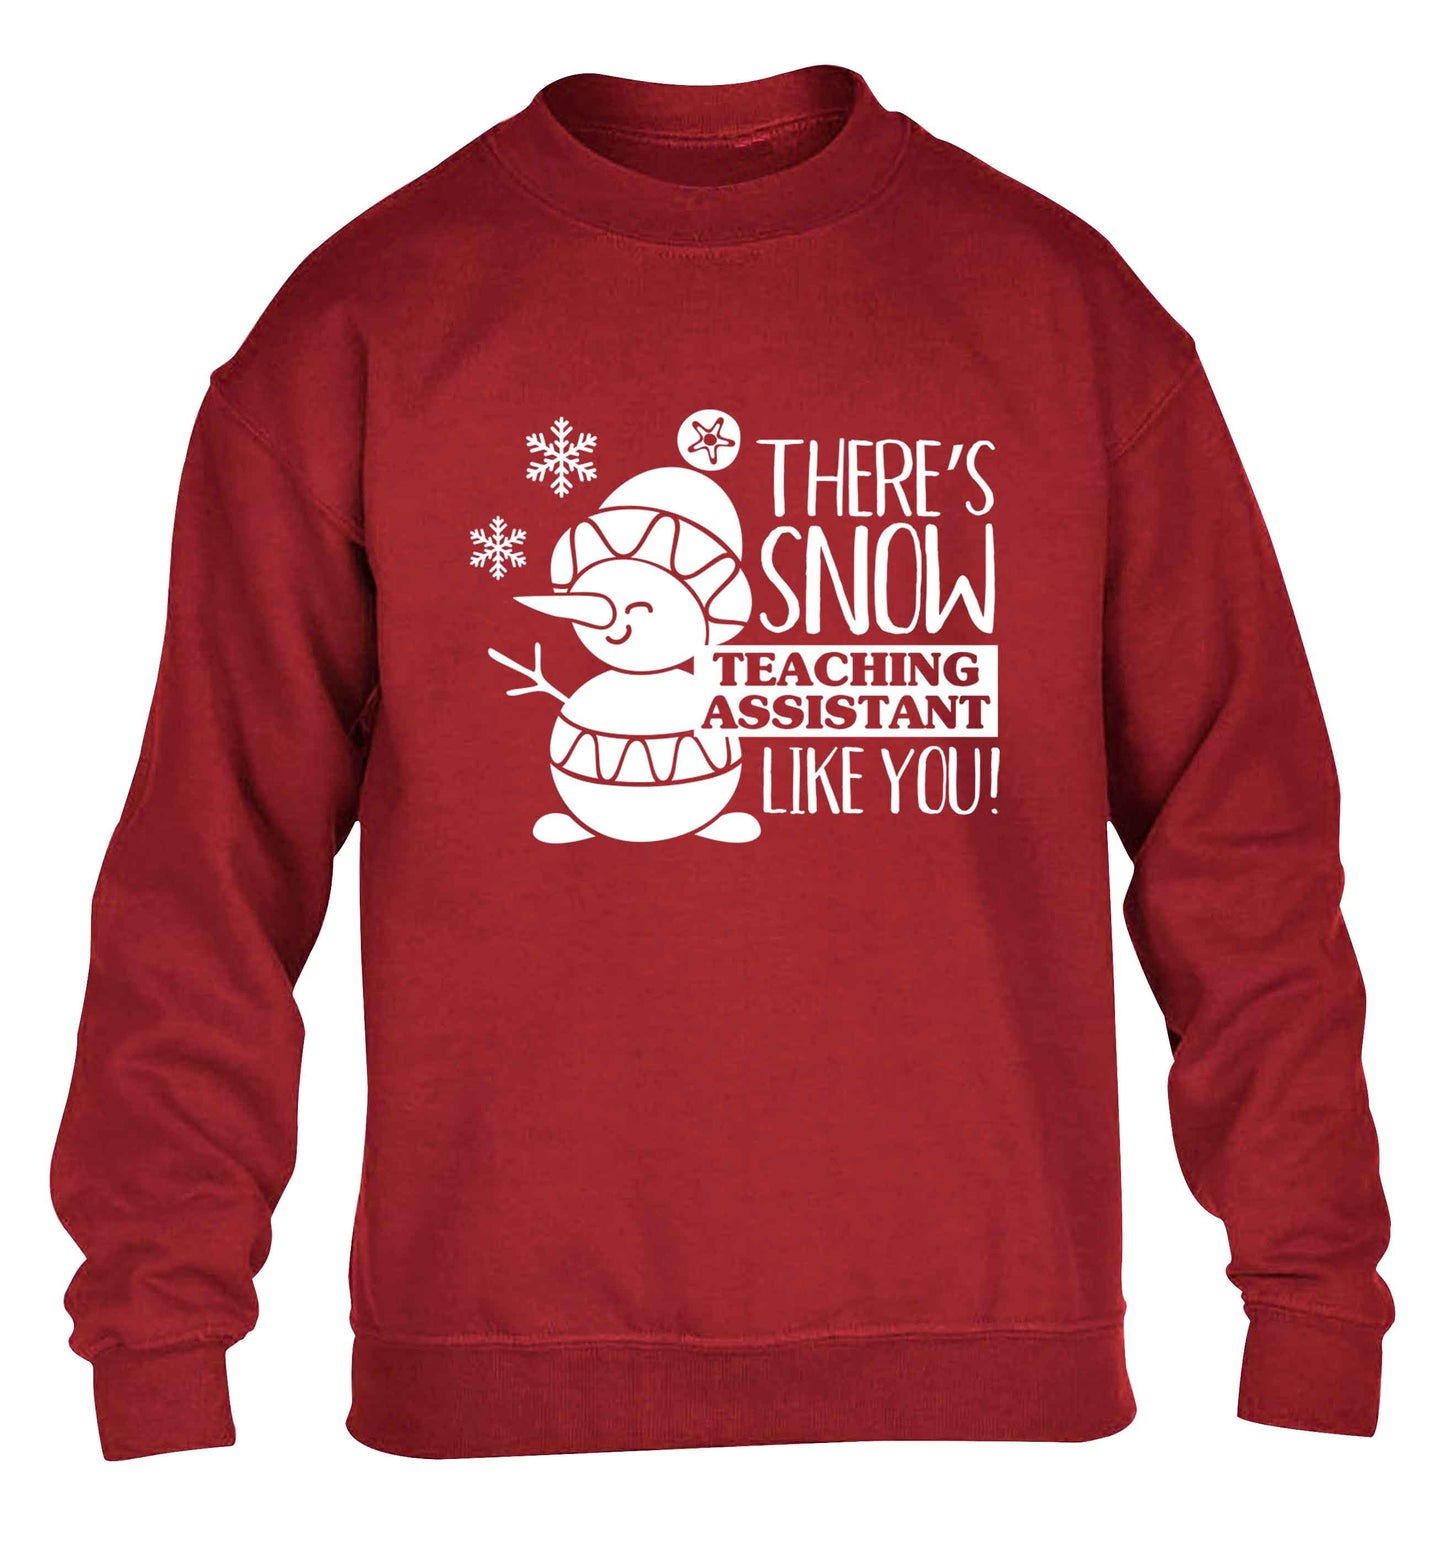 There's snow teaching assistant like you children's grey sweater 12-13 Years